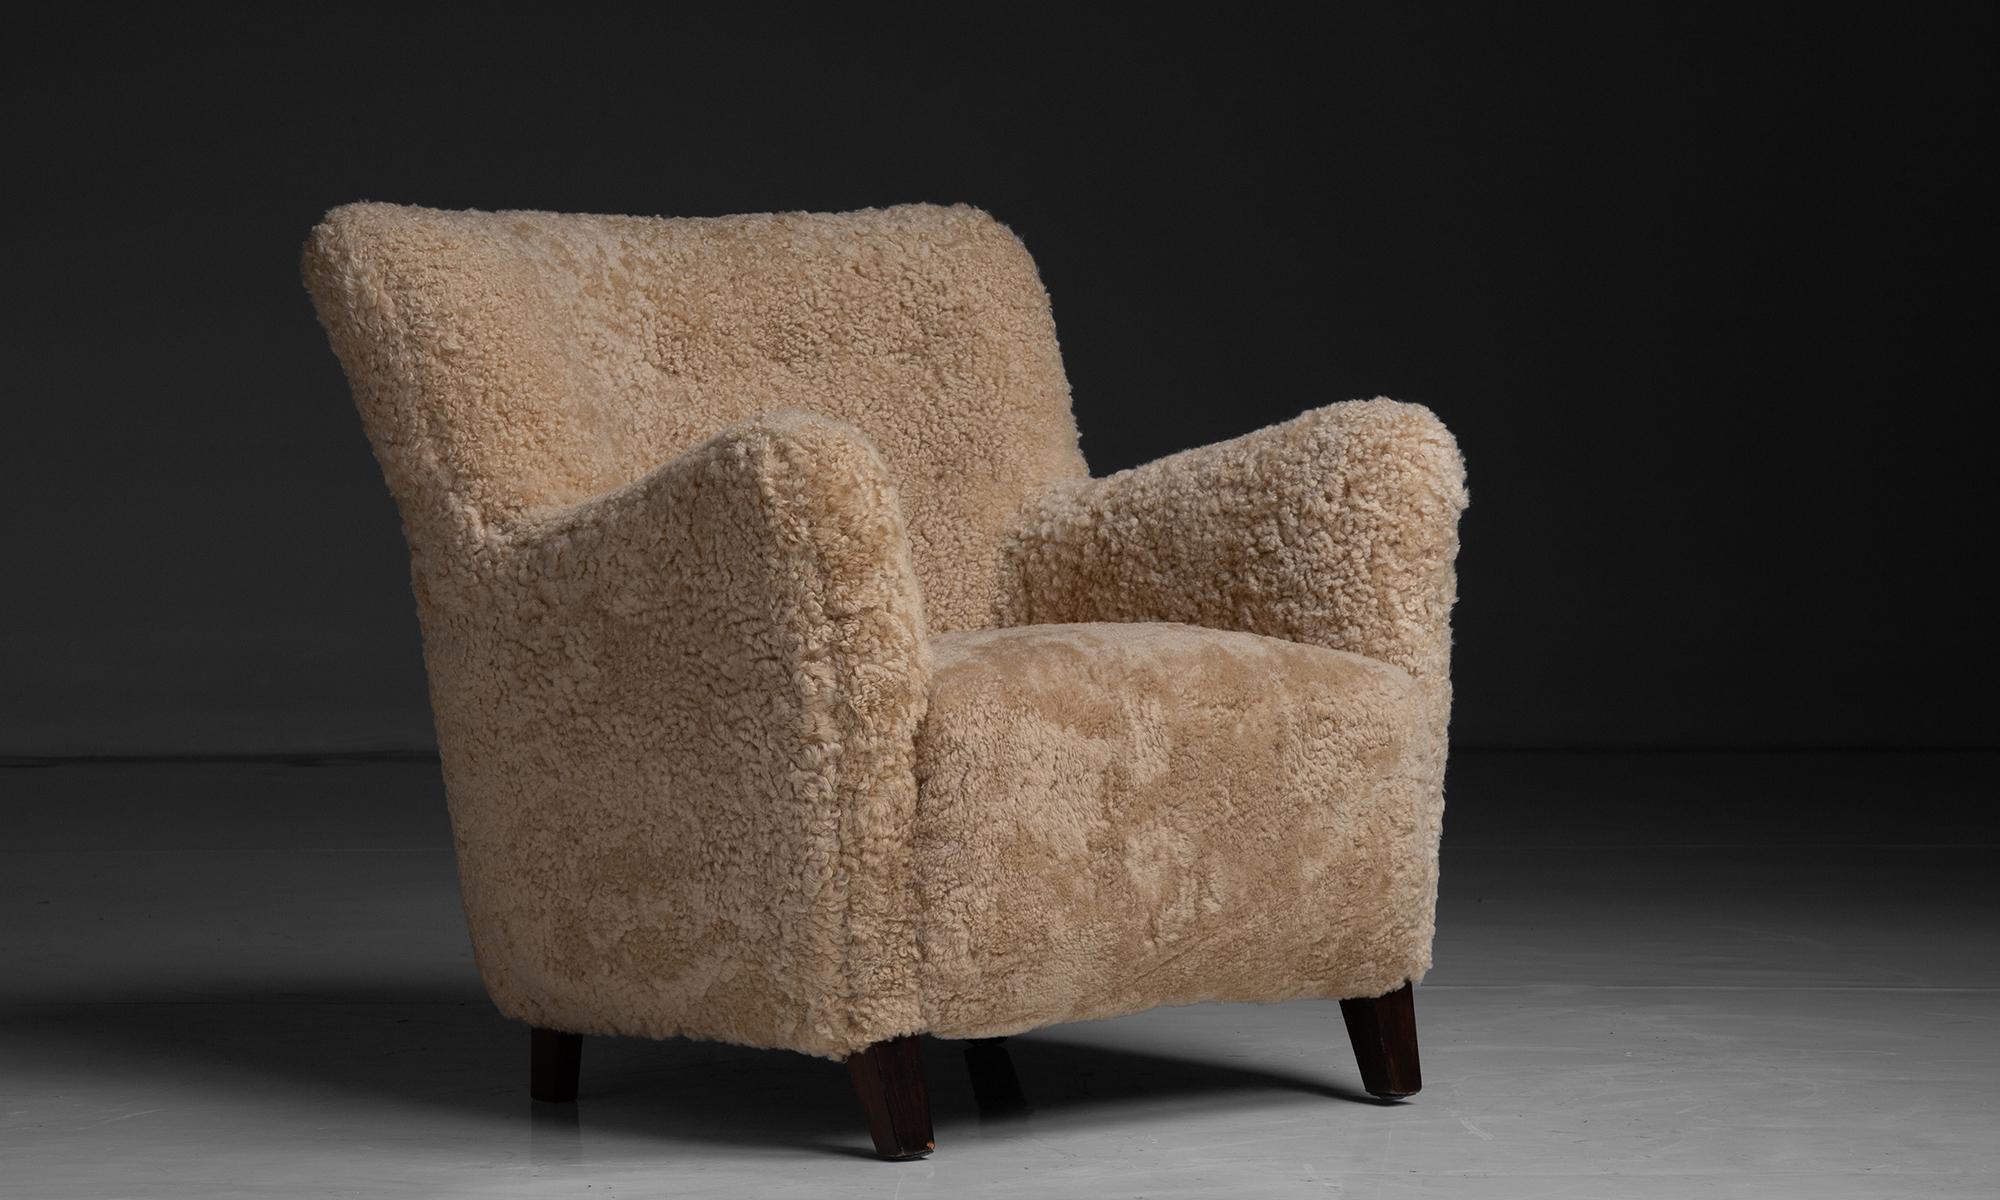 Shearling Lounge Chair

Denmark circa 1940

Button-back lounge chair from a Danish cabinet maker, recently reupholstered in natural honey colored sheepskin.

Measures 31”w x 33.5”d x 32”h x 17”seat